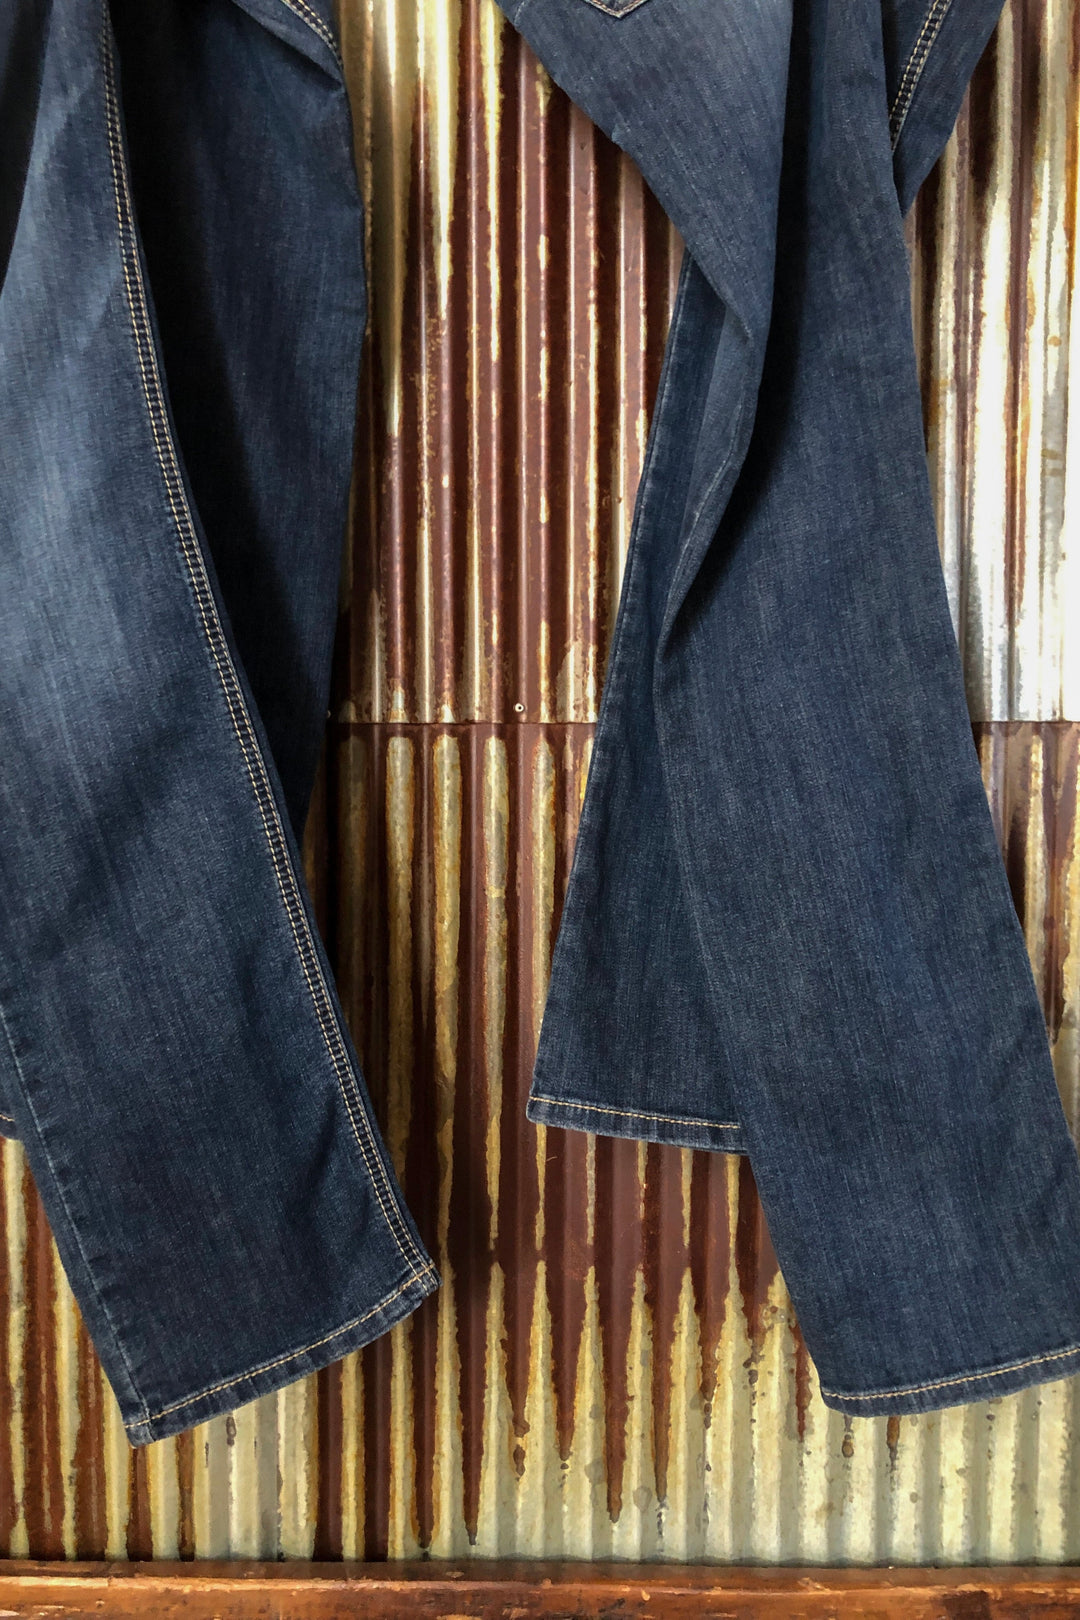 The Chaparral Perfect Rise Straight Leg Jean